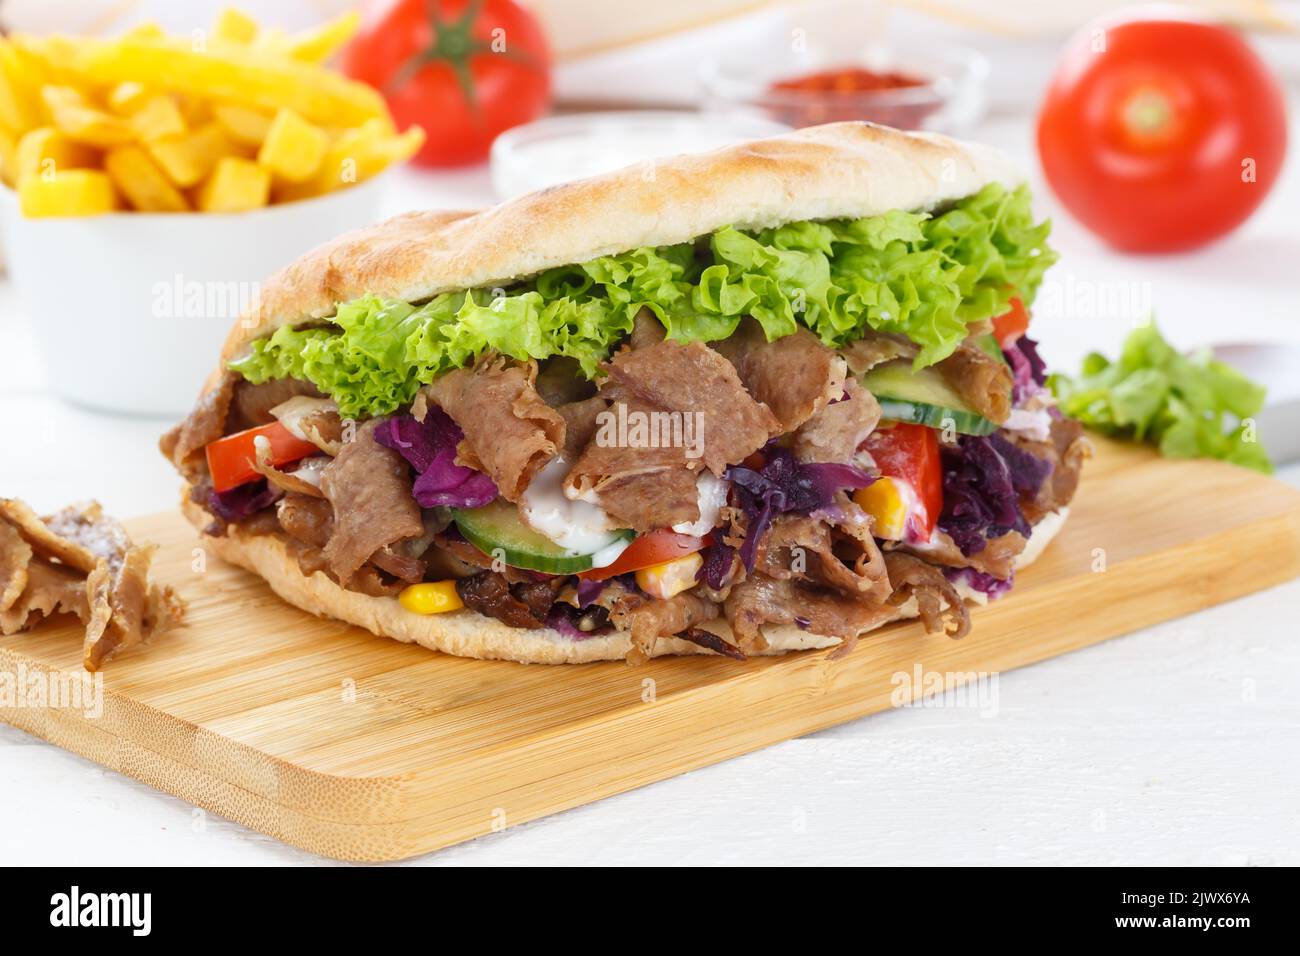 Döner Kebab Doner Kebap fast food meal in flatbread with french fries on a kitchen board Stock Photo